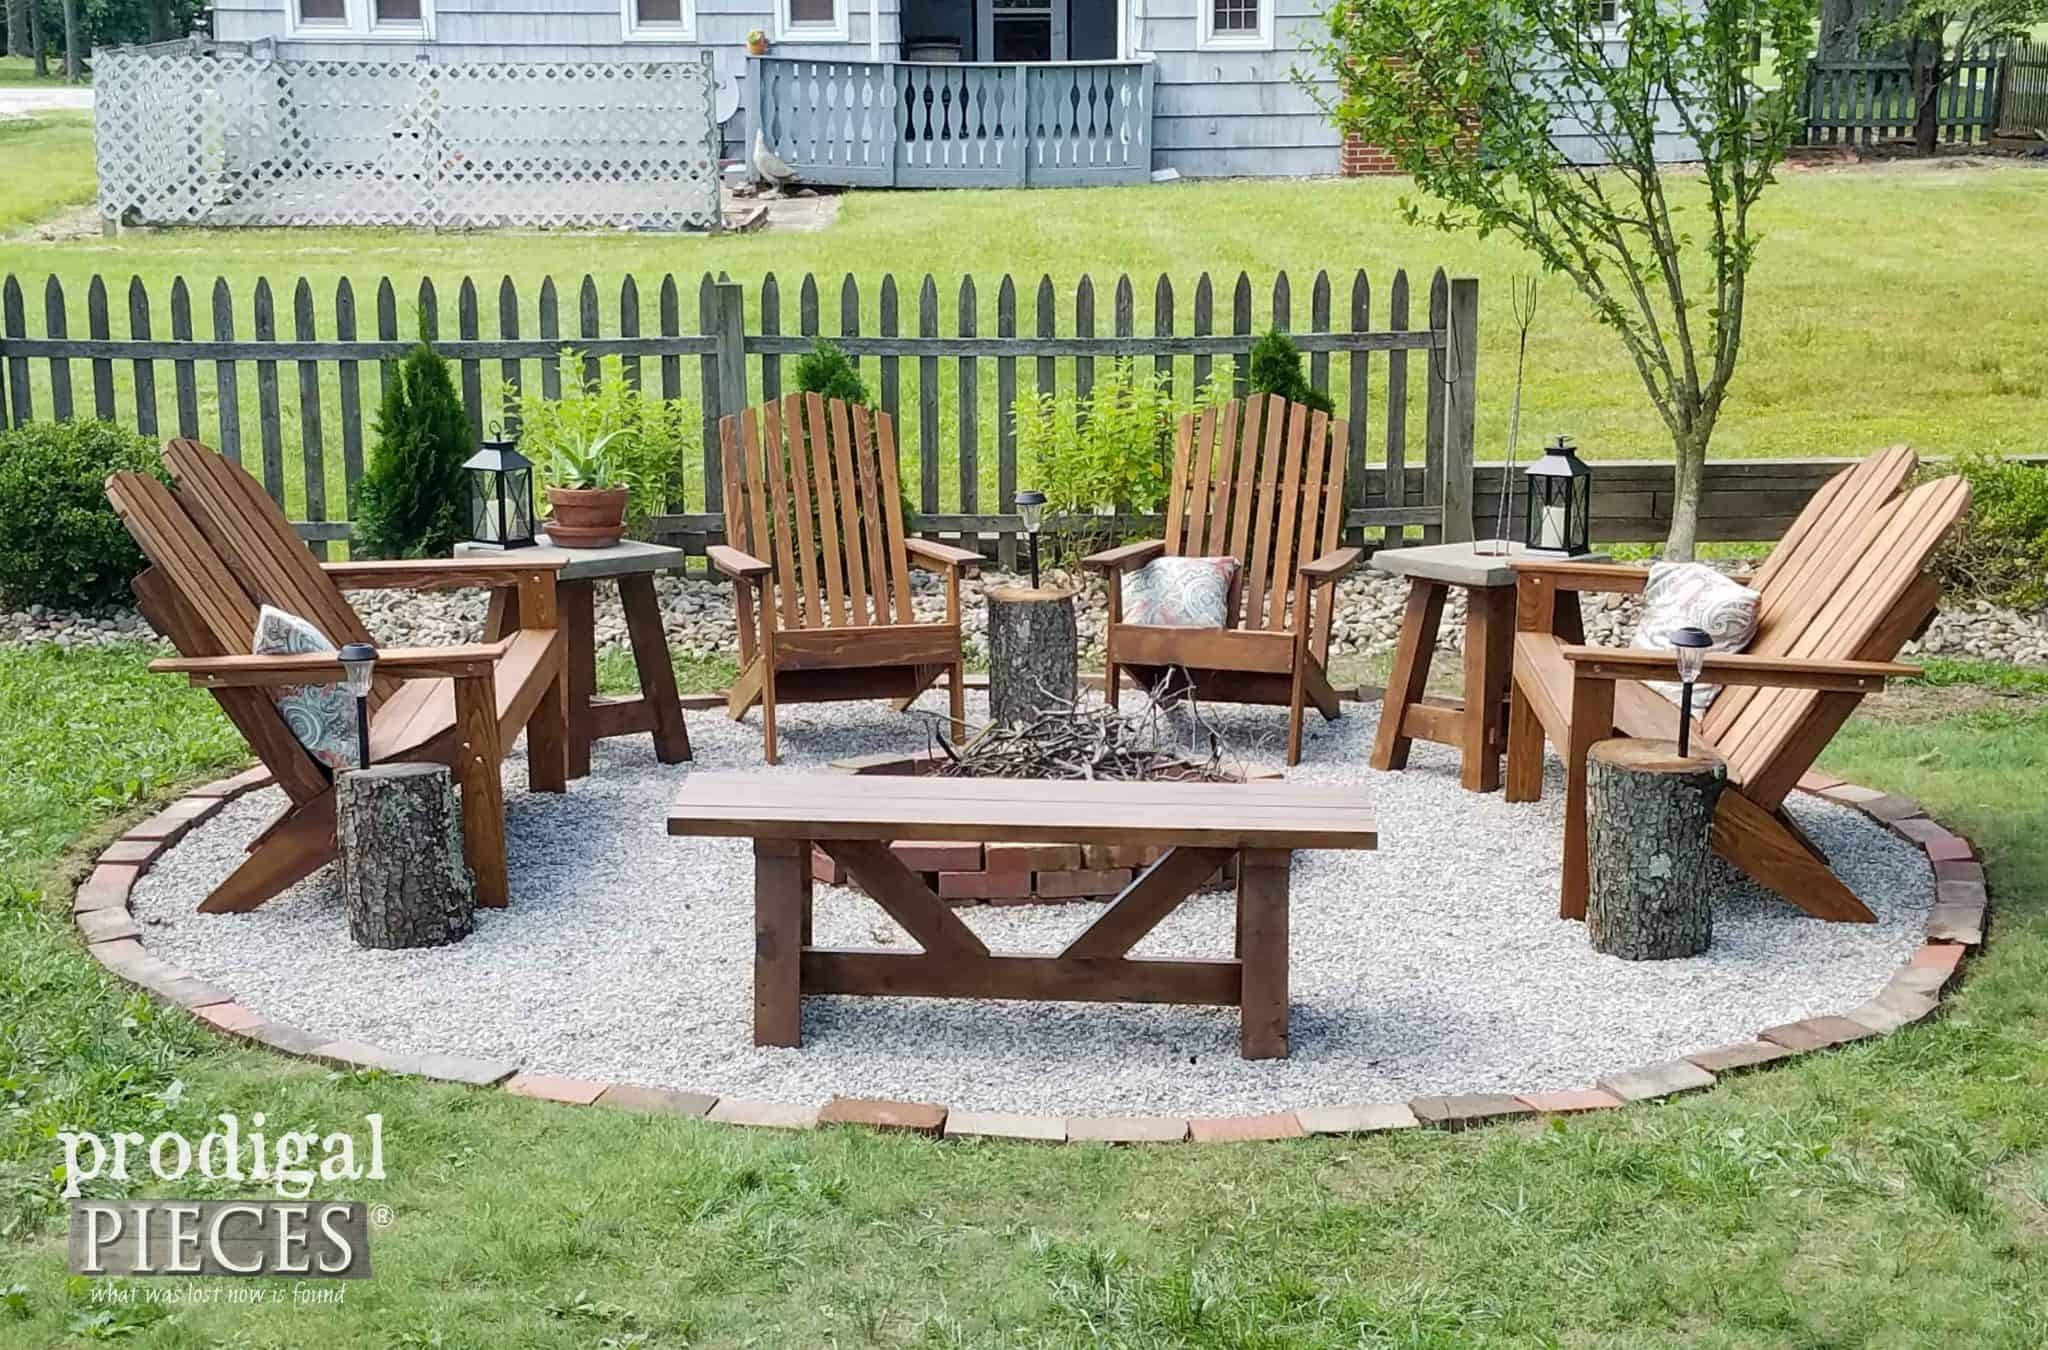 DIY Fire Pits Outdoor
 Check Out These 12 DIY Fire Pits To Prepare For Summertime